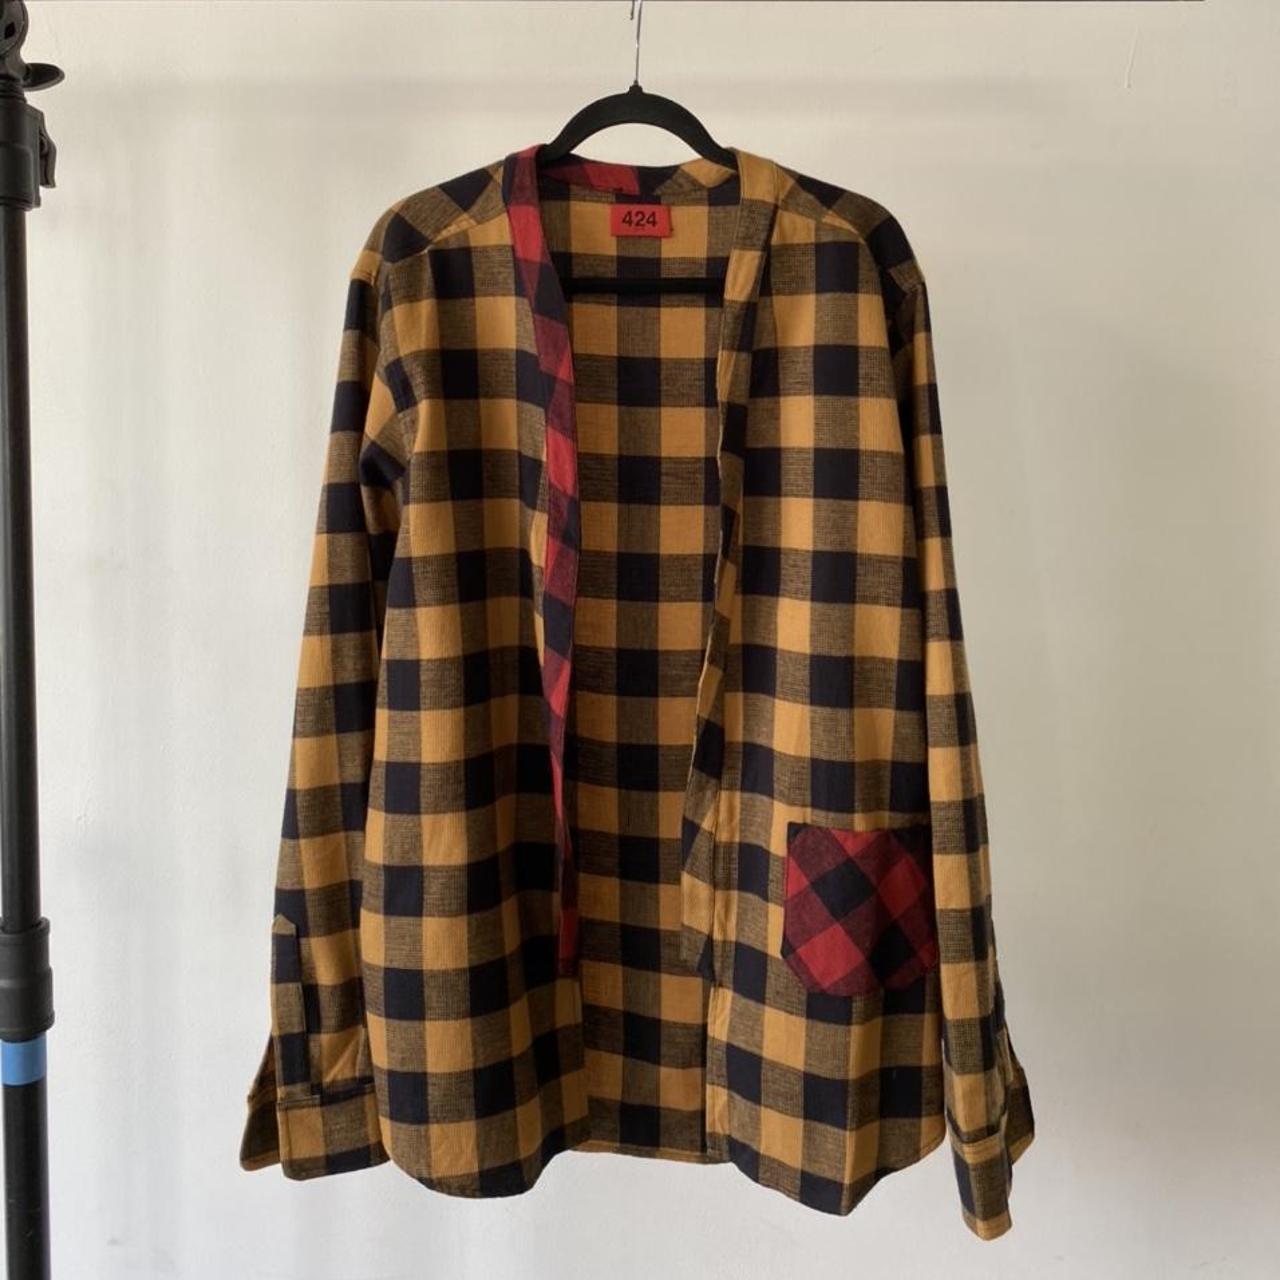 Product Image 1 - Plaid flannel kimono with red